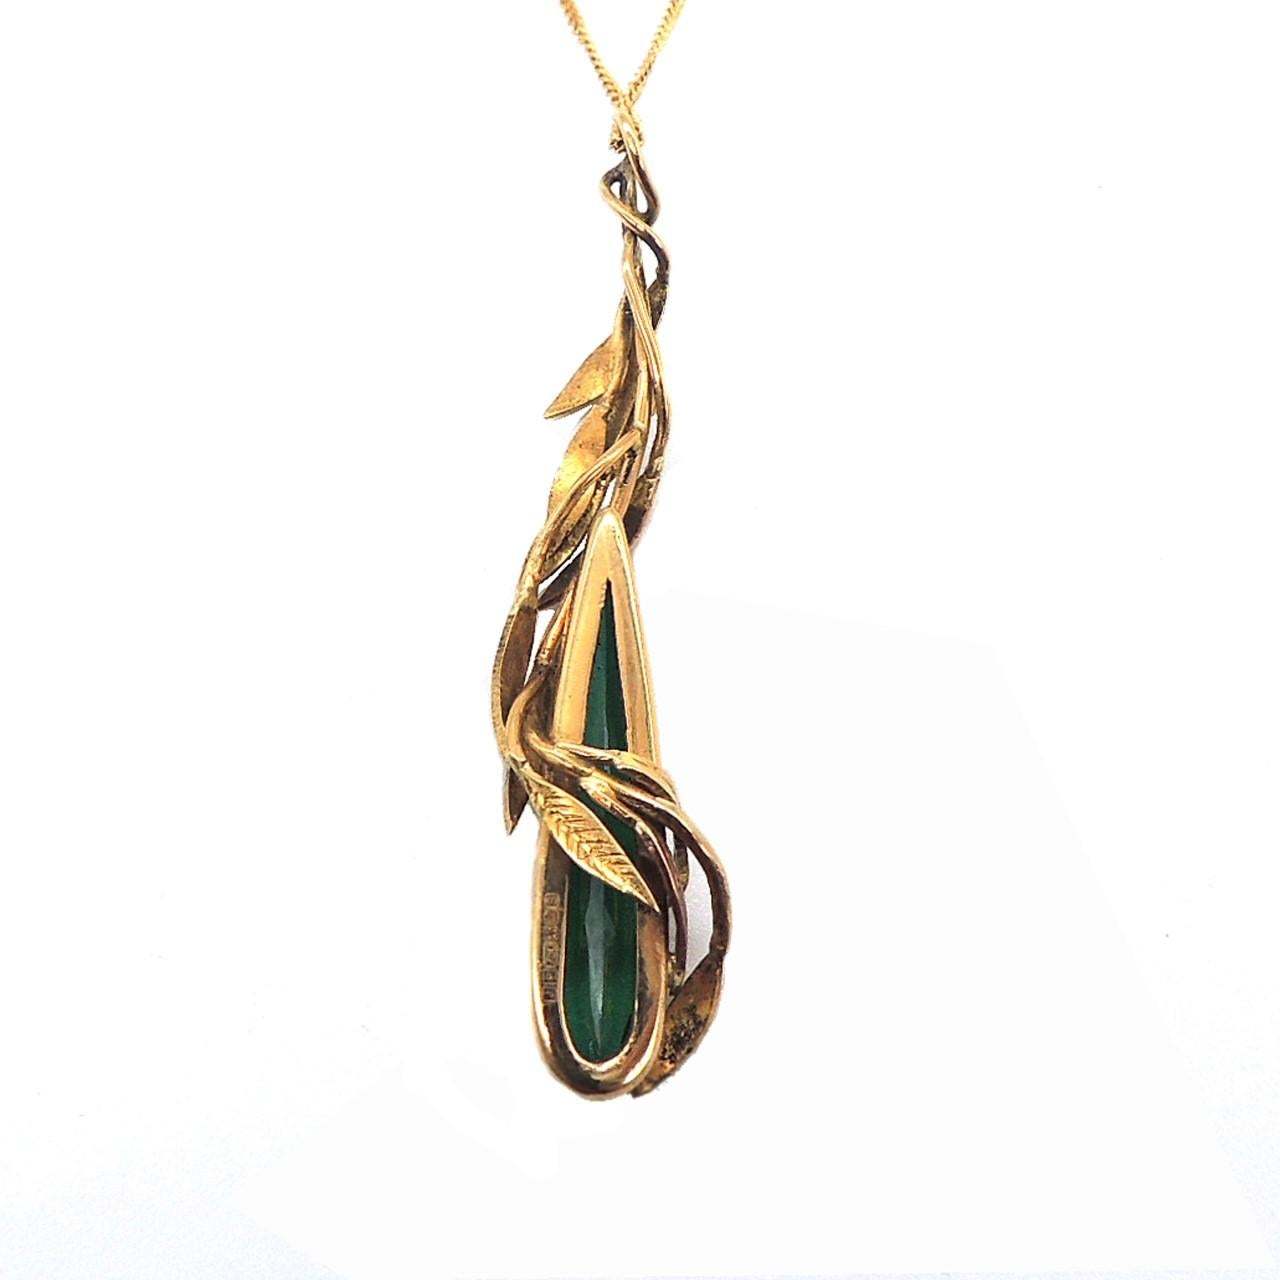 Handmade Green Tourmaline Pear Cut 18 Karat Gold Pendant Necklace.

This is a unique handmade pendant with a beautiful floral/autumnal design.

The pendant is totally handmade in 18k yellow gold with a stunning 5 carat fancy pear/teardrop cut green